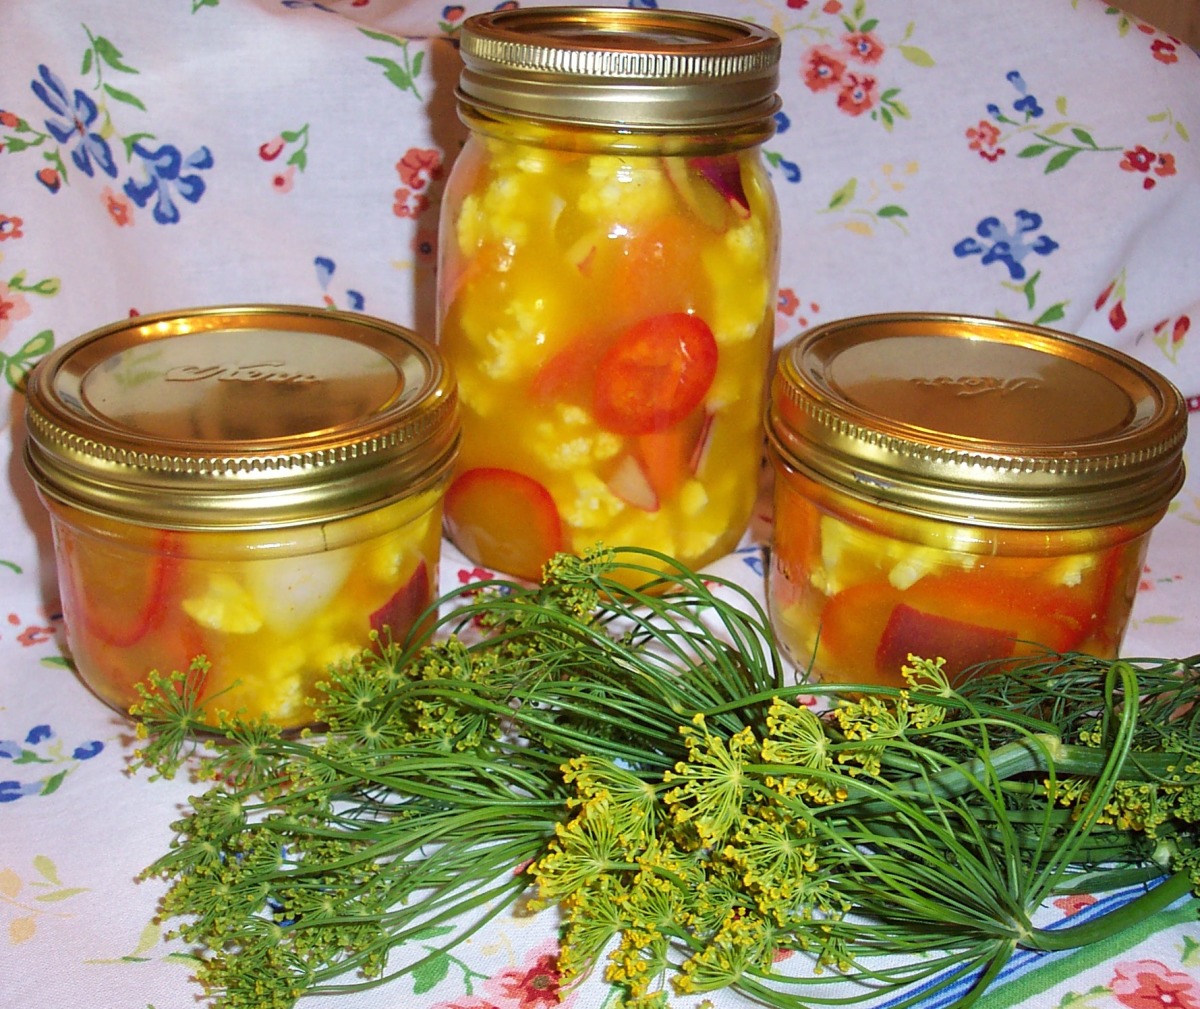 Mixed Vegetable Pickles image